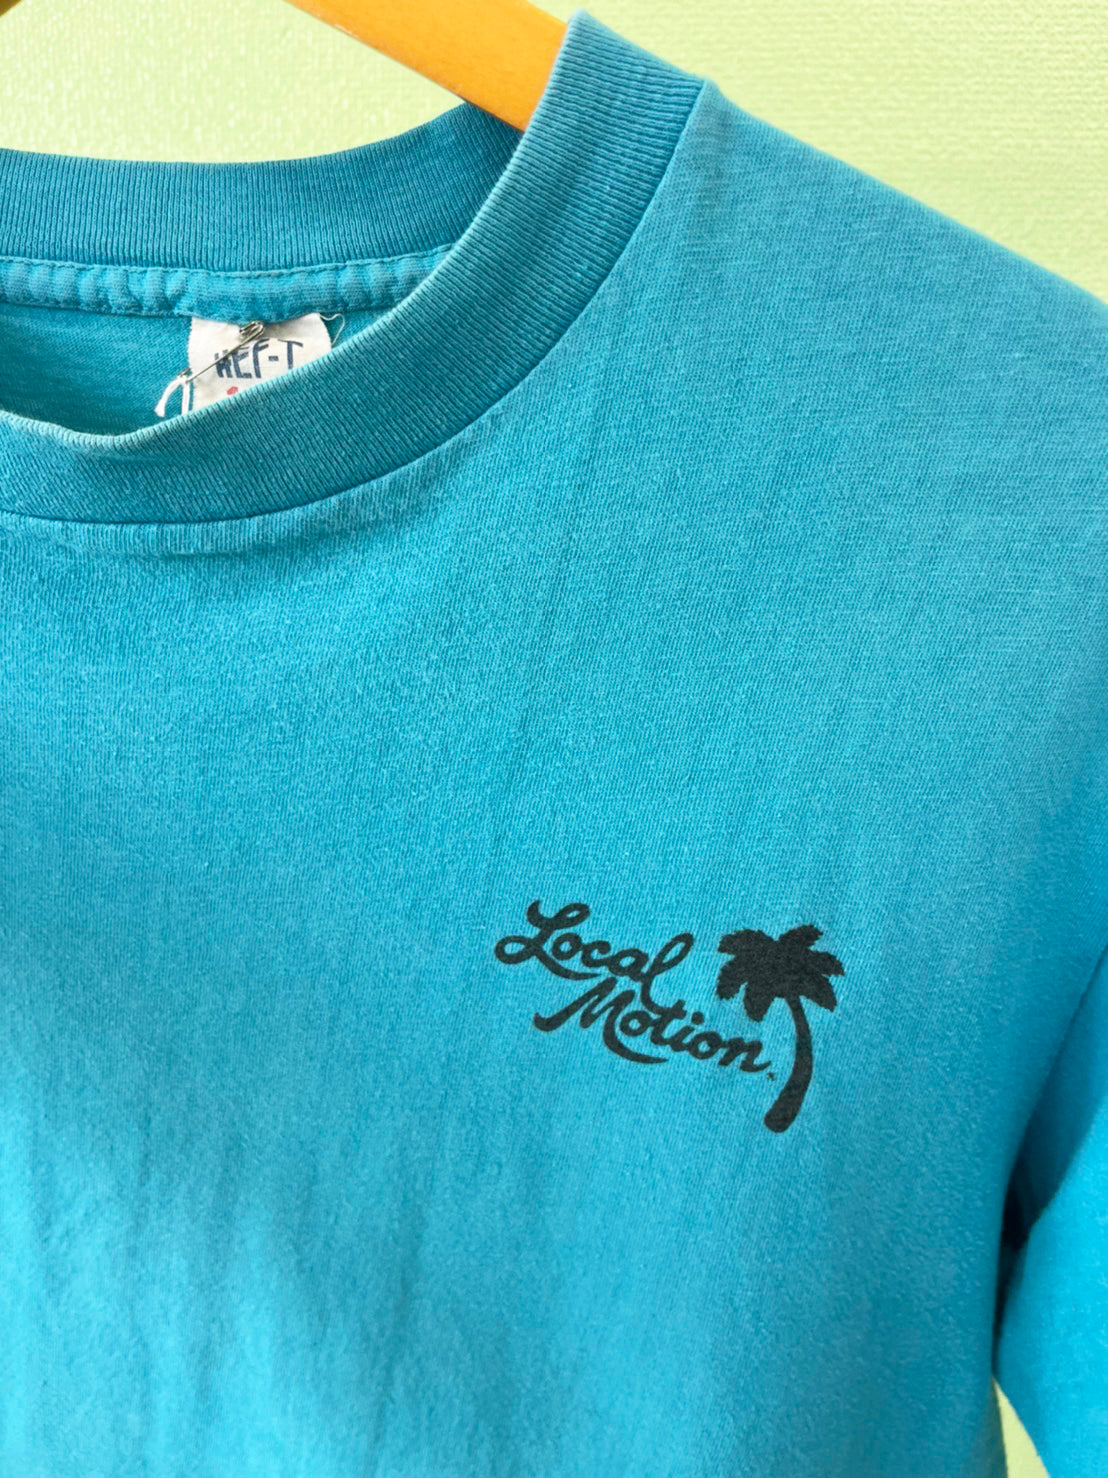 【Local motion】80's vintage  surf Local motion T-shirt made in USA HEF-Tタグ ( men's L)